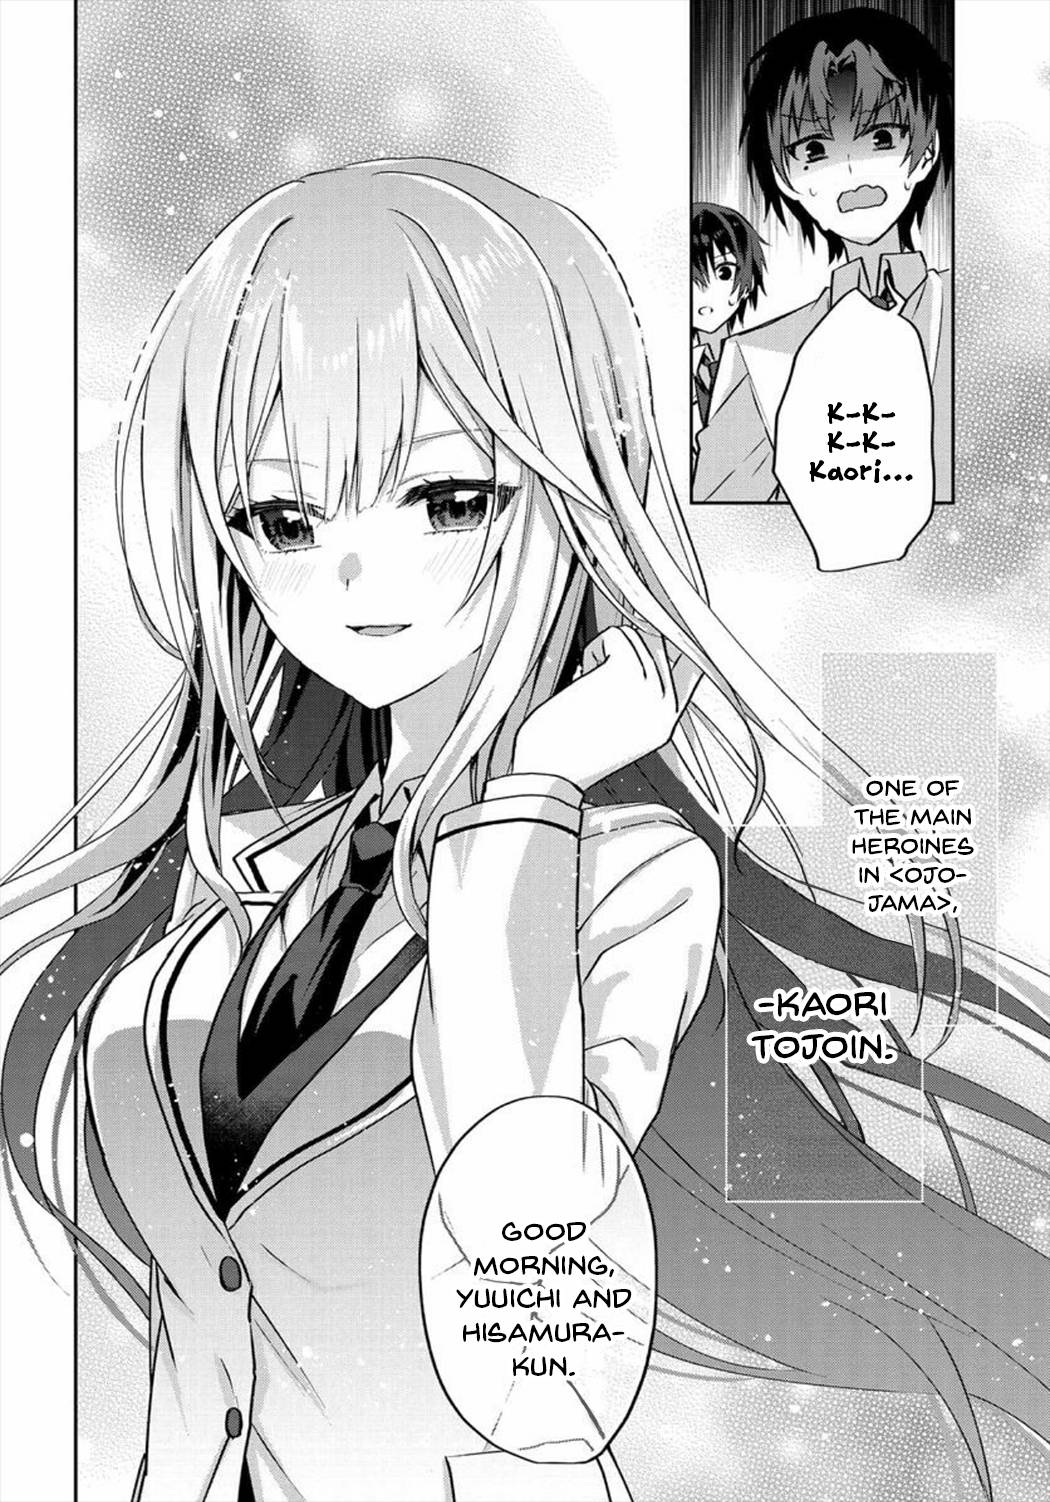 Since I’Ve Entered The World Of Romantic Comedy Manga, I’Ll Do My Best To Make The Losing Heroine Happy - chapter 3.1 - #6